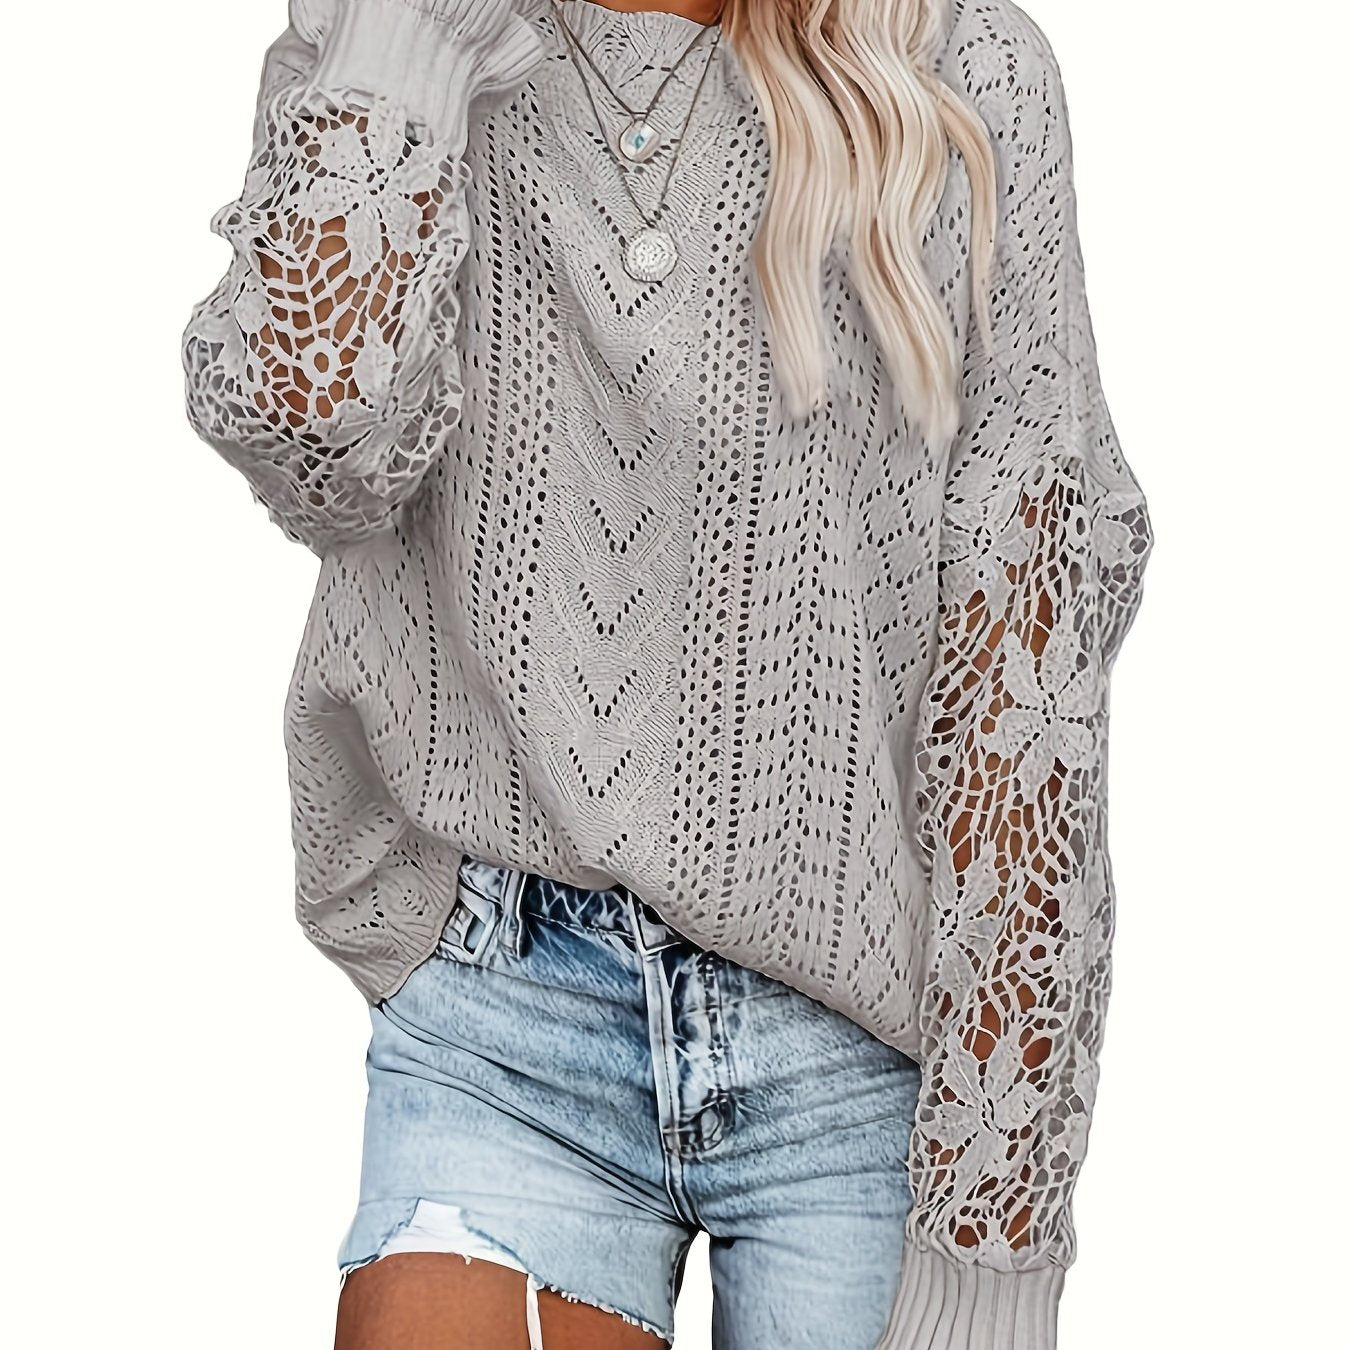 Vzyzv Contrast Lace Eyelet Knit Sweater, Casual Crew Neck Long Sleeve Sweater, Women's Clothing